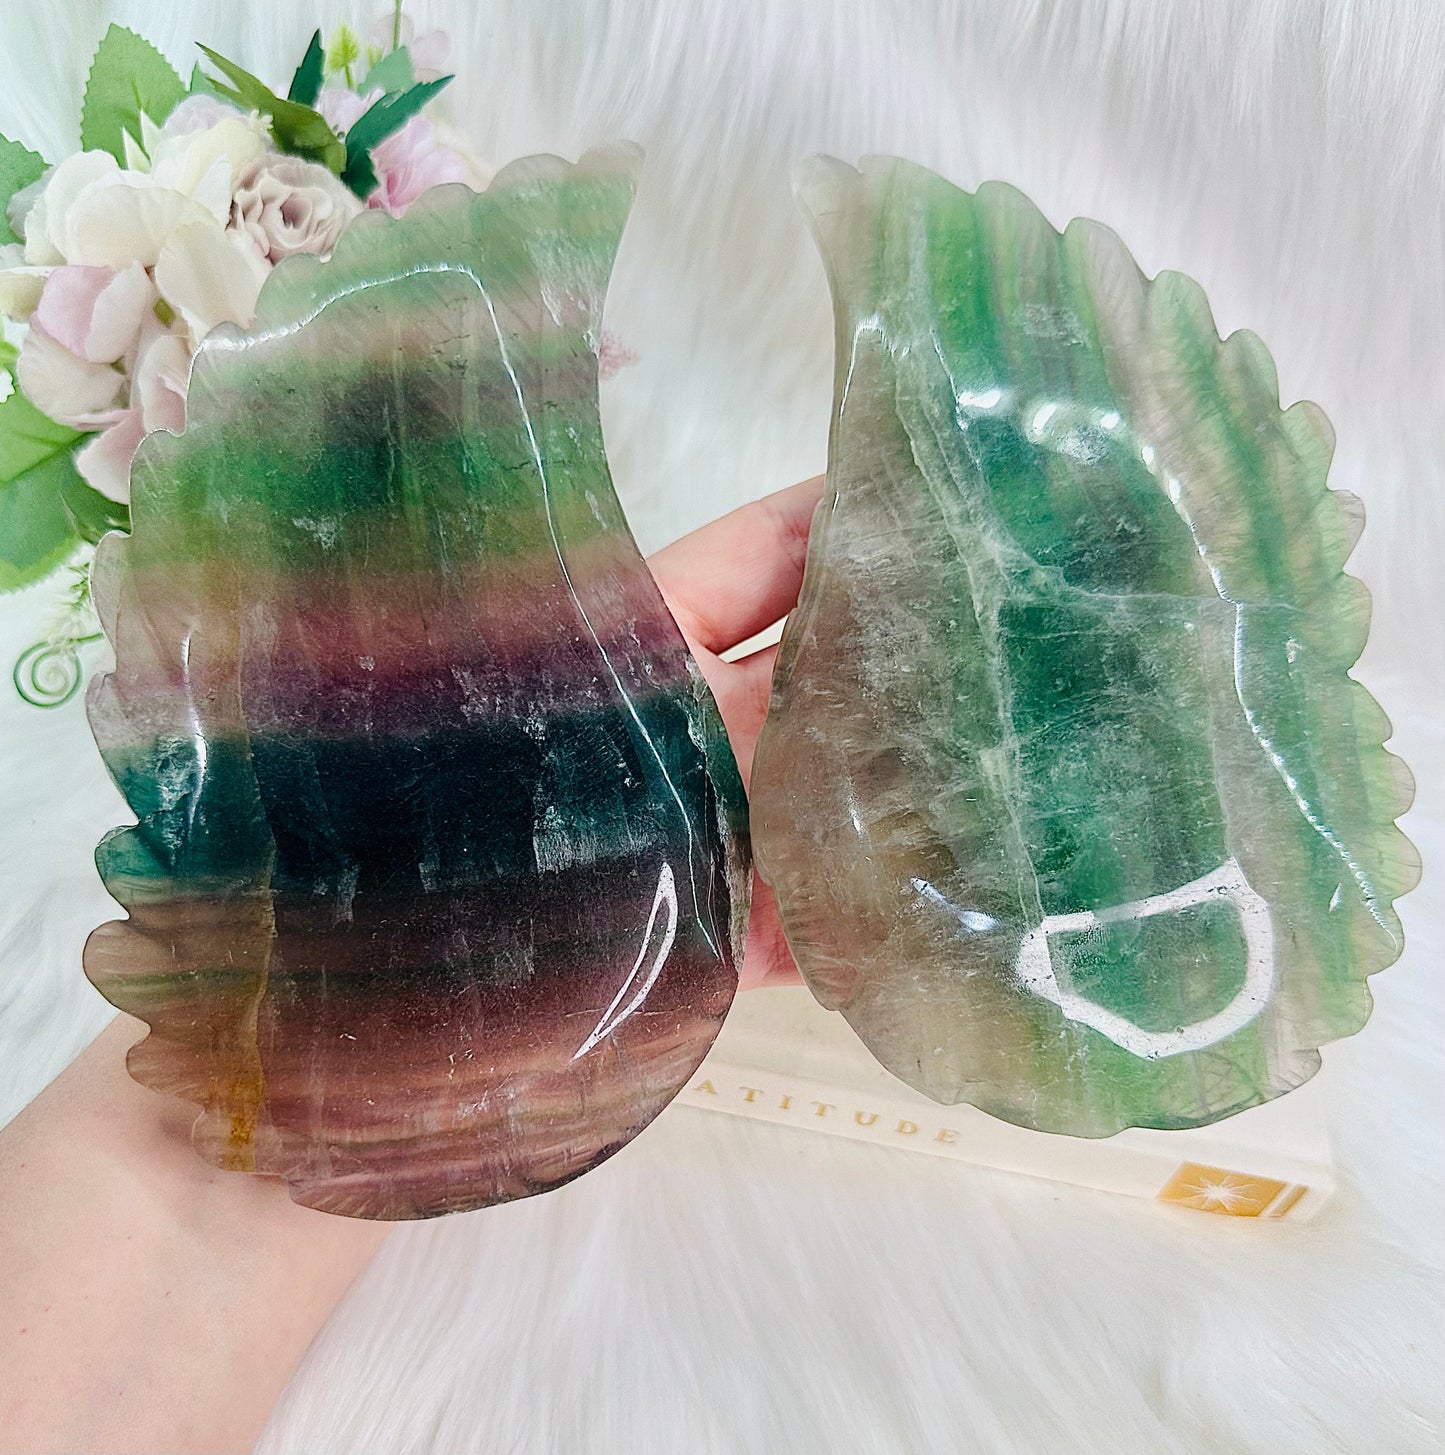 ⚜️ SALE ⚜️The Biggest Most Stunning Set of Rainbow Fluorite Angel Wings on Gold Stand From Brazil - The Wings Alone Weigh 1.49KG, The Set is 30cm High (inc stand) Absolute Statement Piece